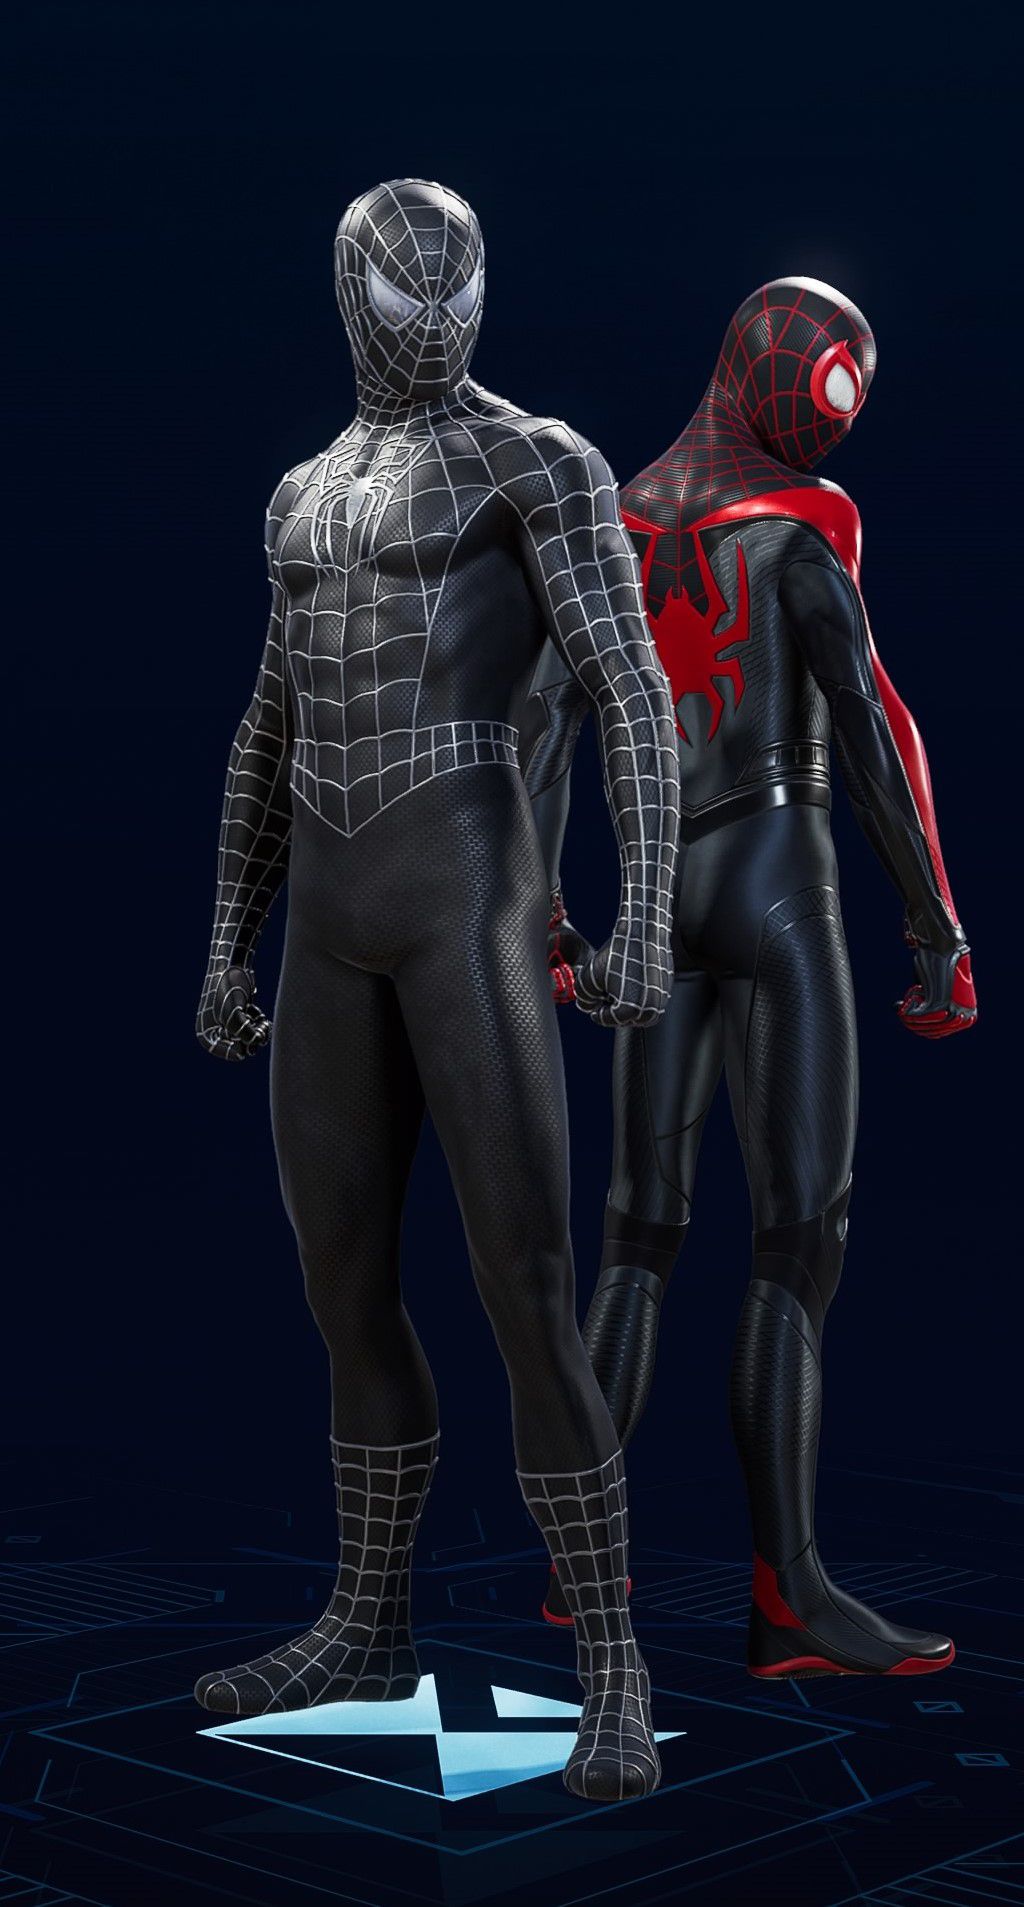 Peter Parker stands in his Webbed Black Suit in the suit selection screen of Spider-Man 2.